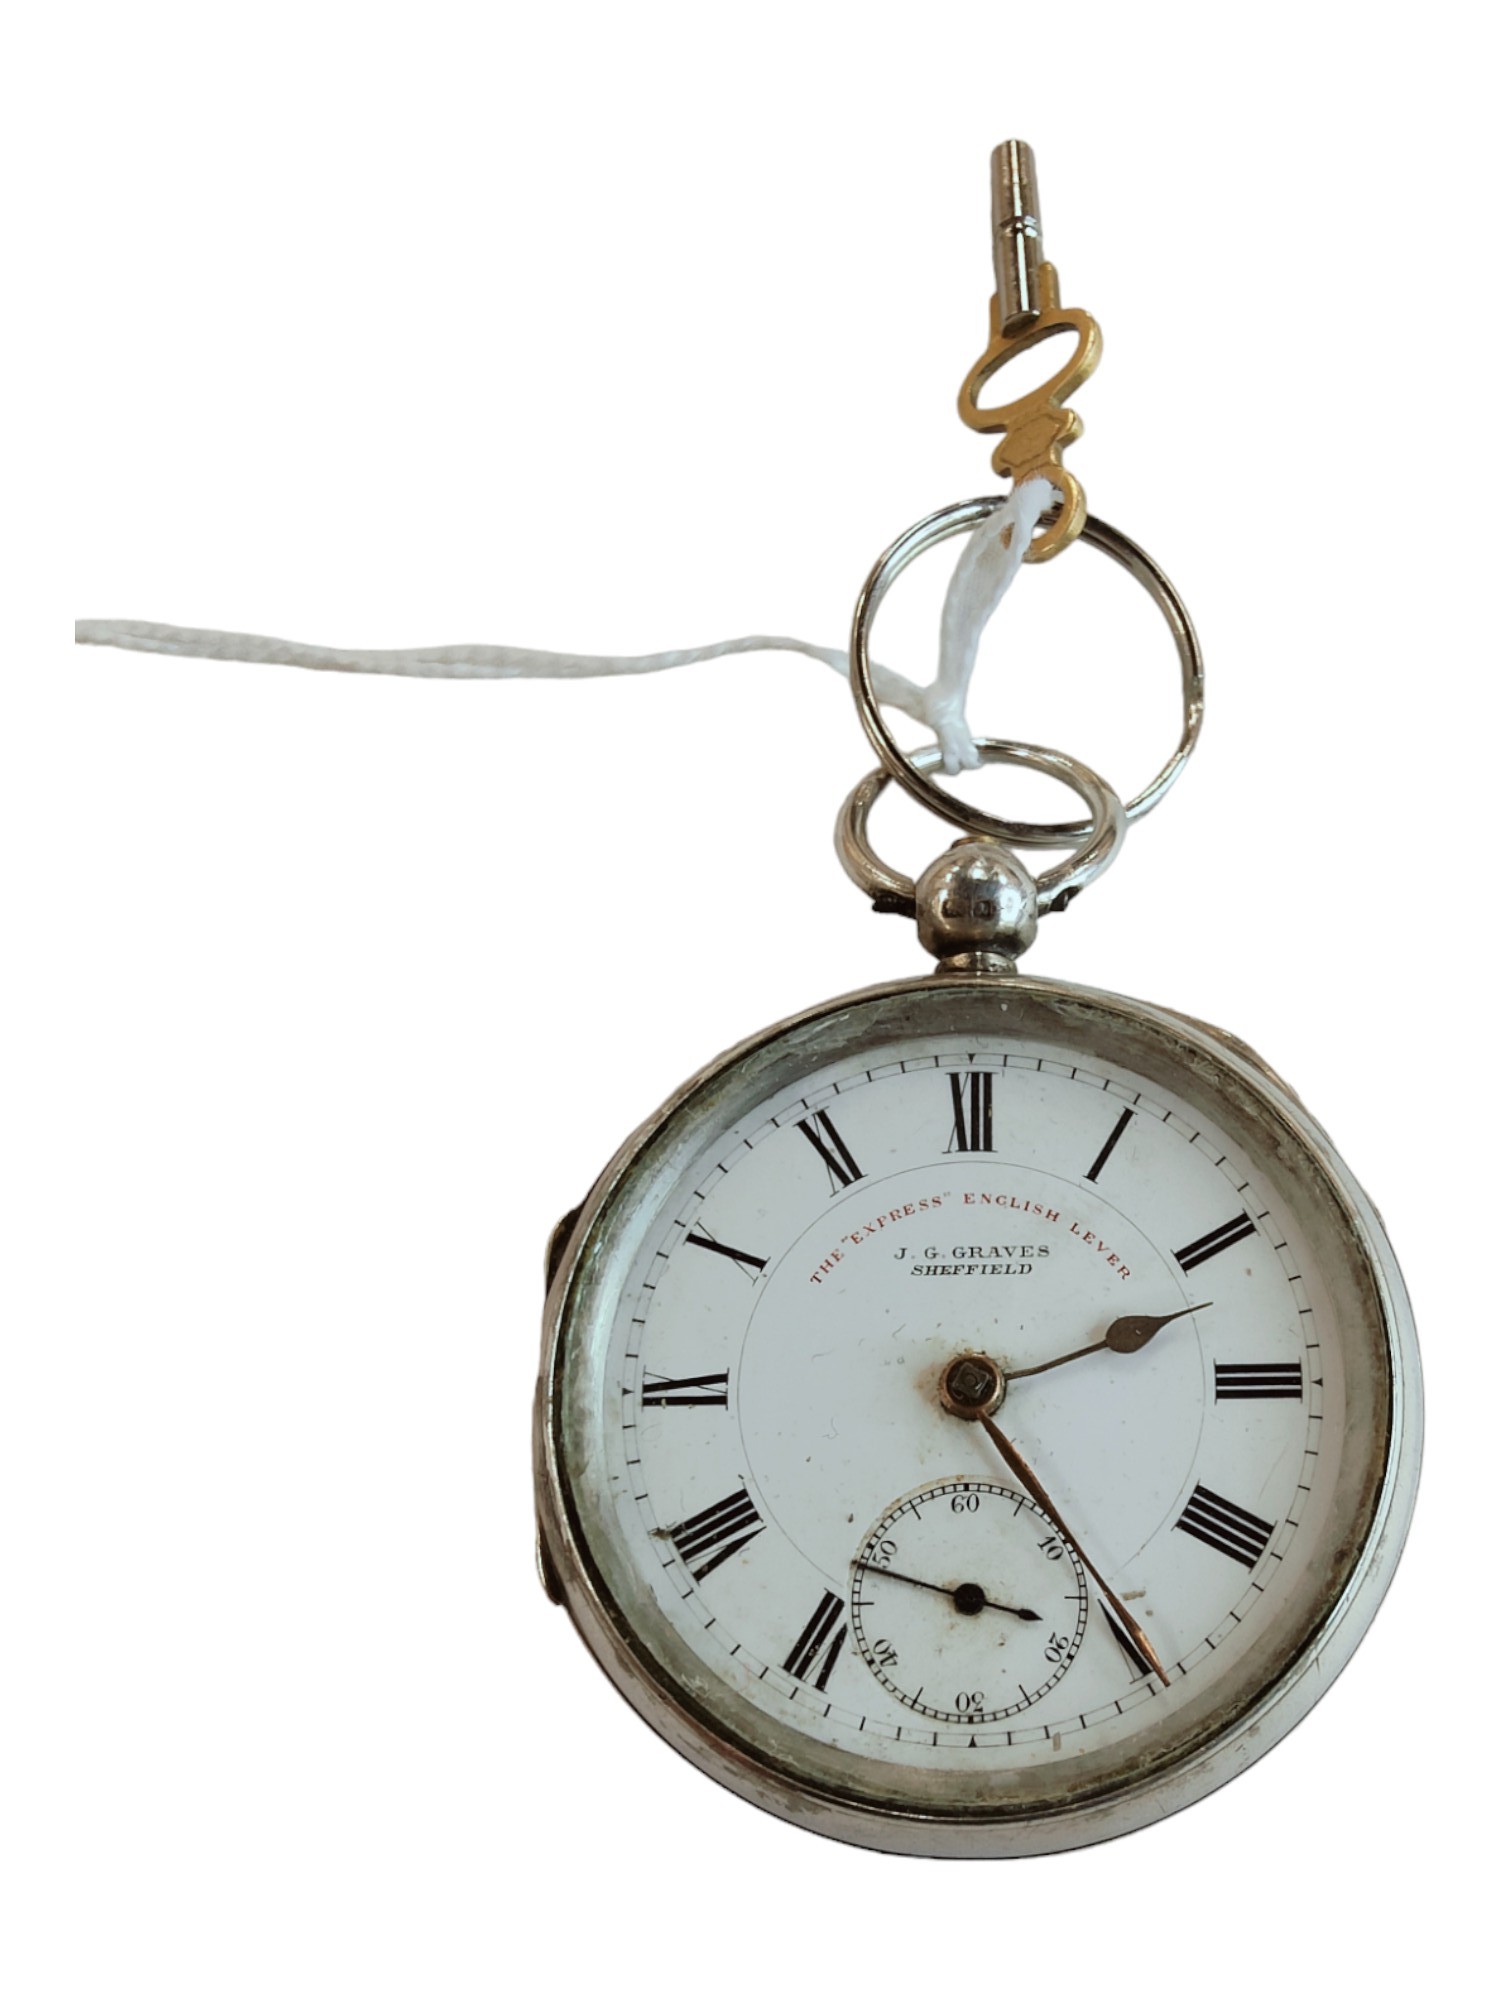 SILVER POCKET WATCH - HALLMARKED FOR CHESTER - GOOD WORKING ORDER